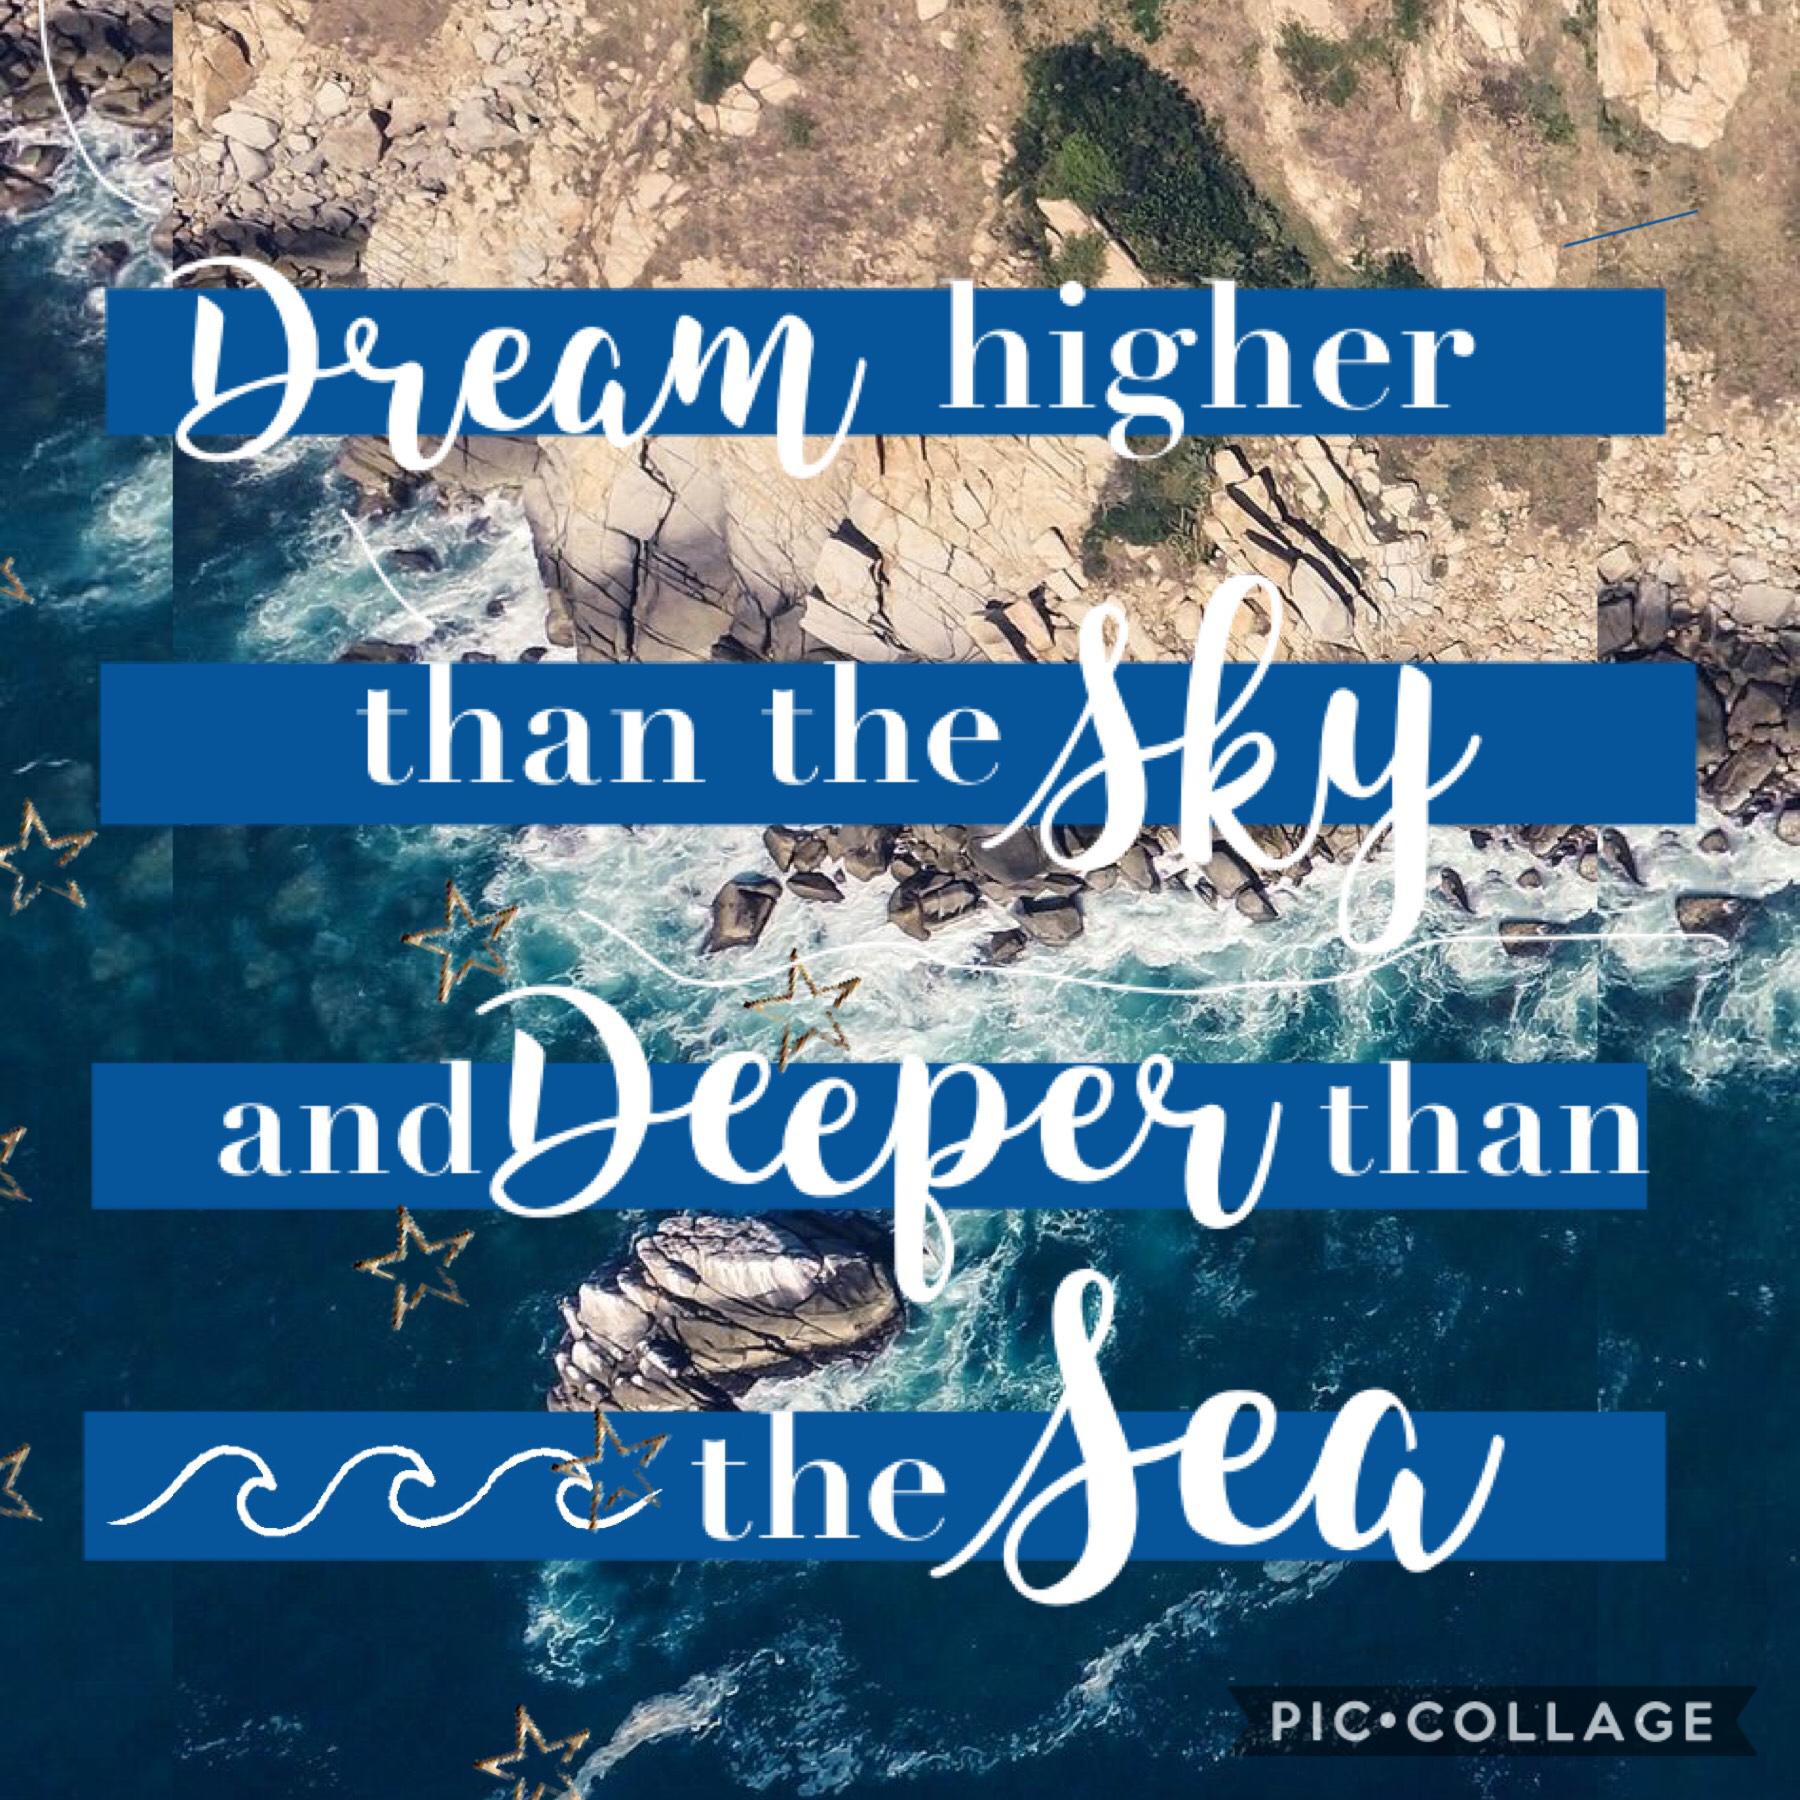 🌊⛅️Dream higher than the sky and deeper than the sea⛅️🌊